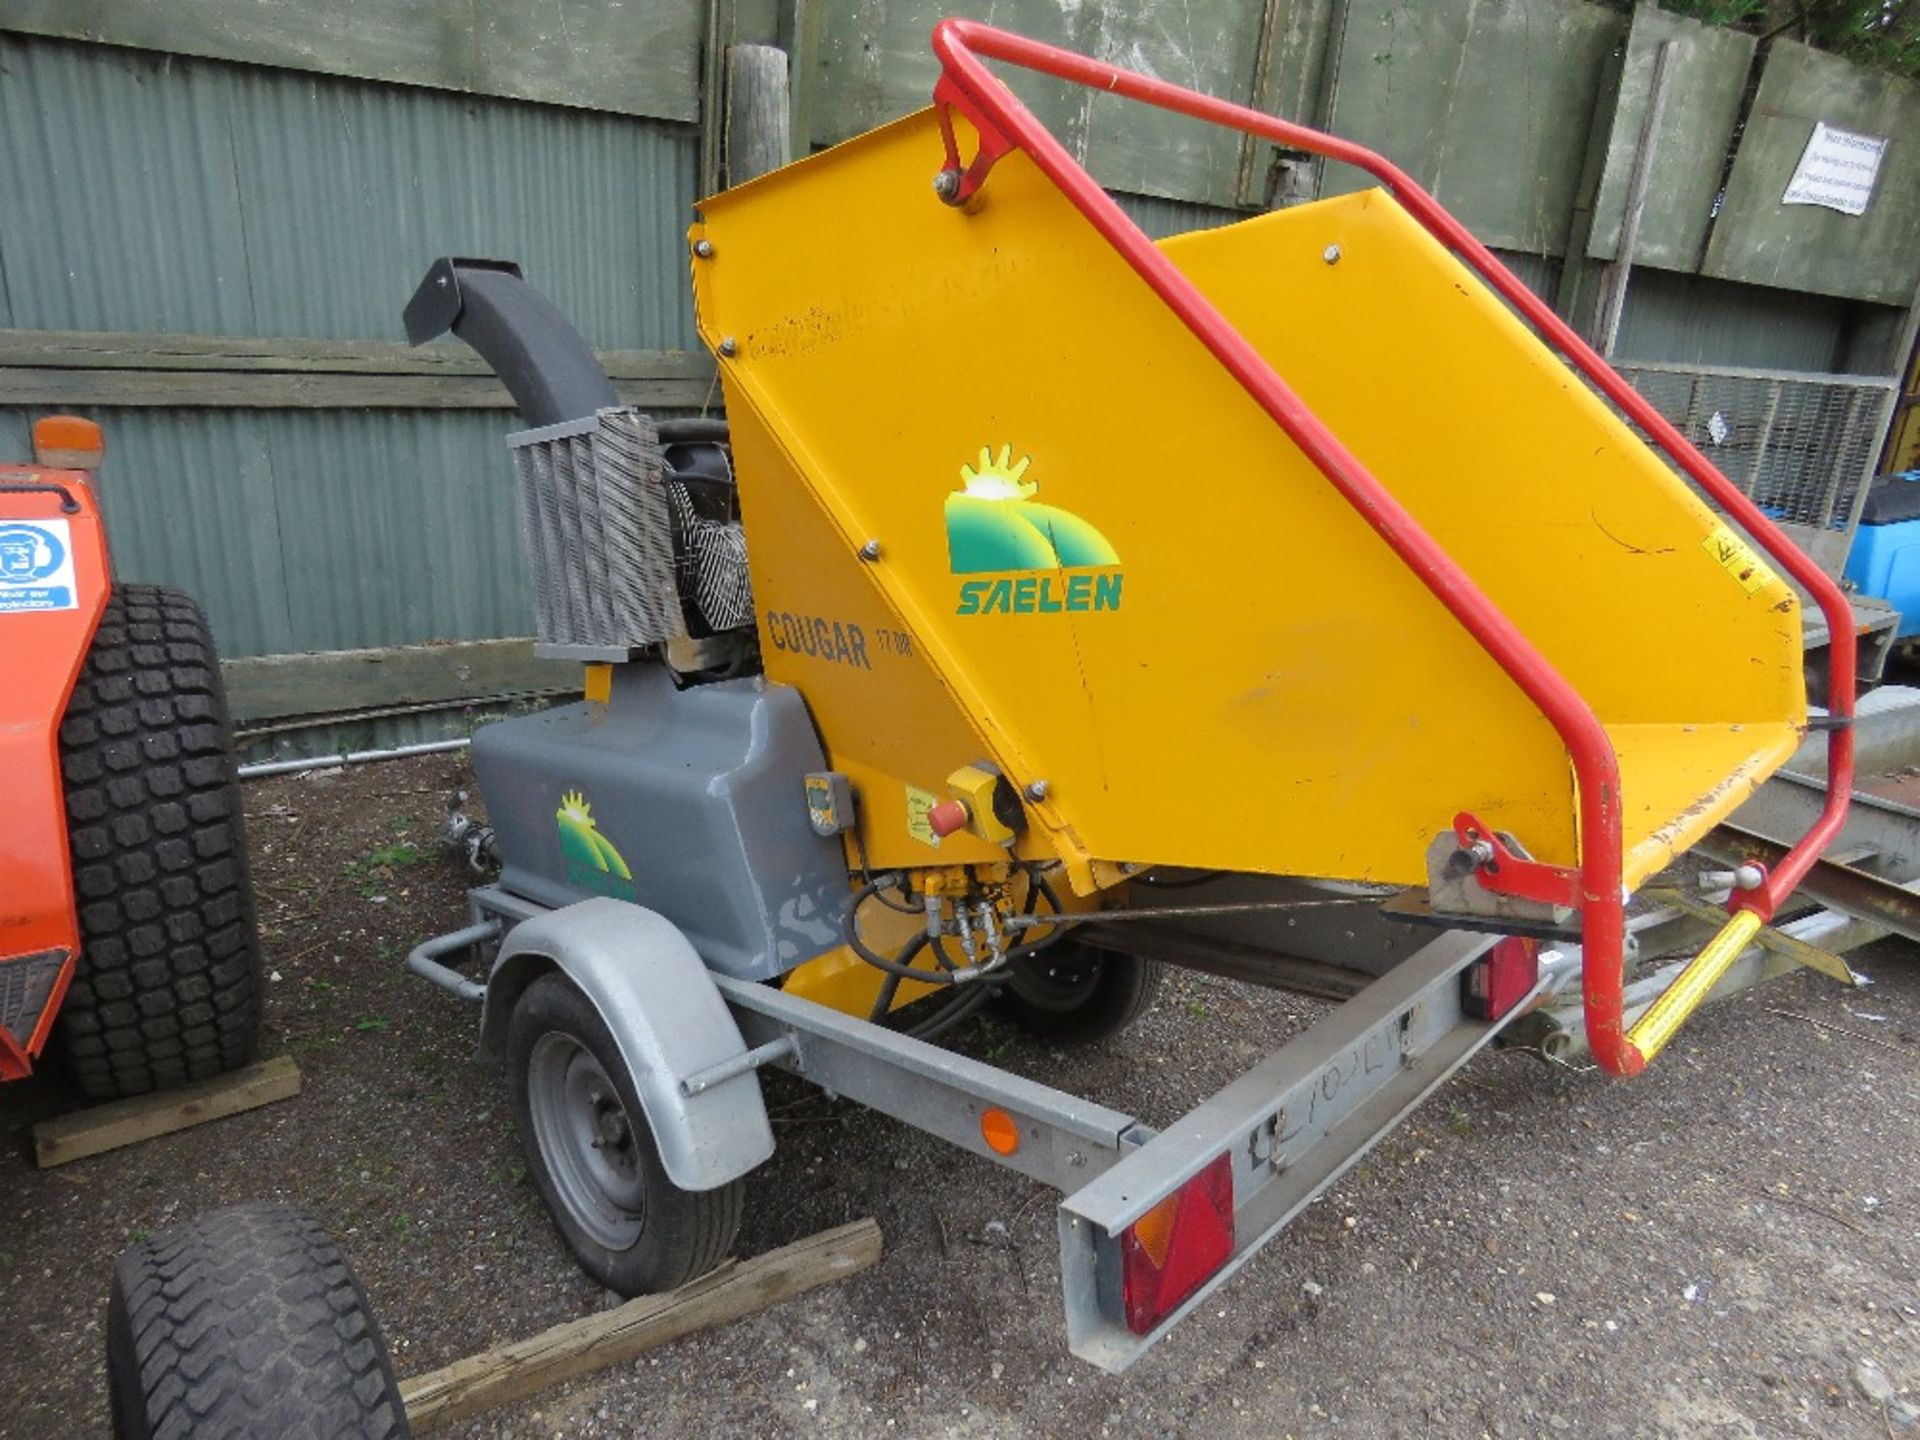 SAELEN COUGAR DR17 EVO DIESEL ENGINED CHIPPER, YEAR 2011. 251 REC HOURS. SN:11101. WHEN TESTED WAS S